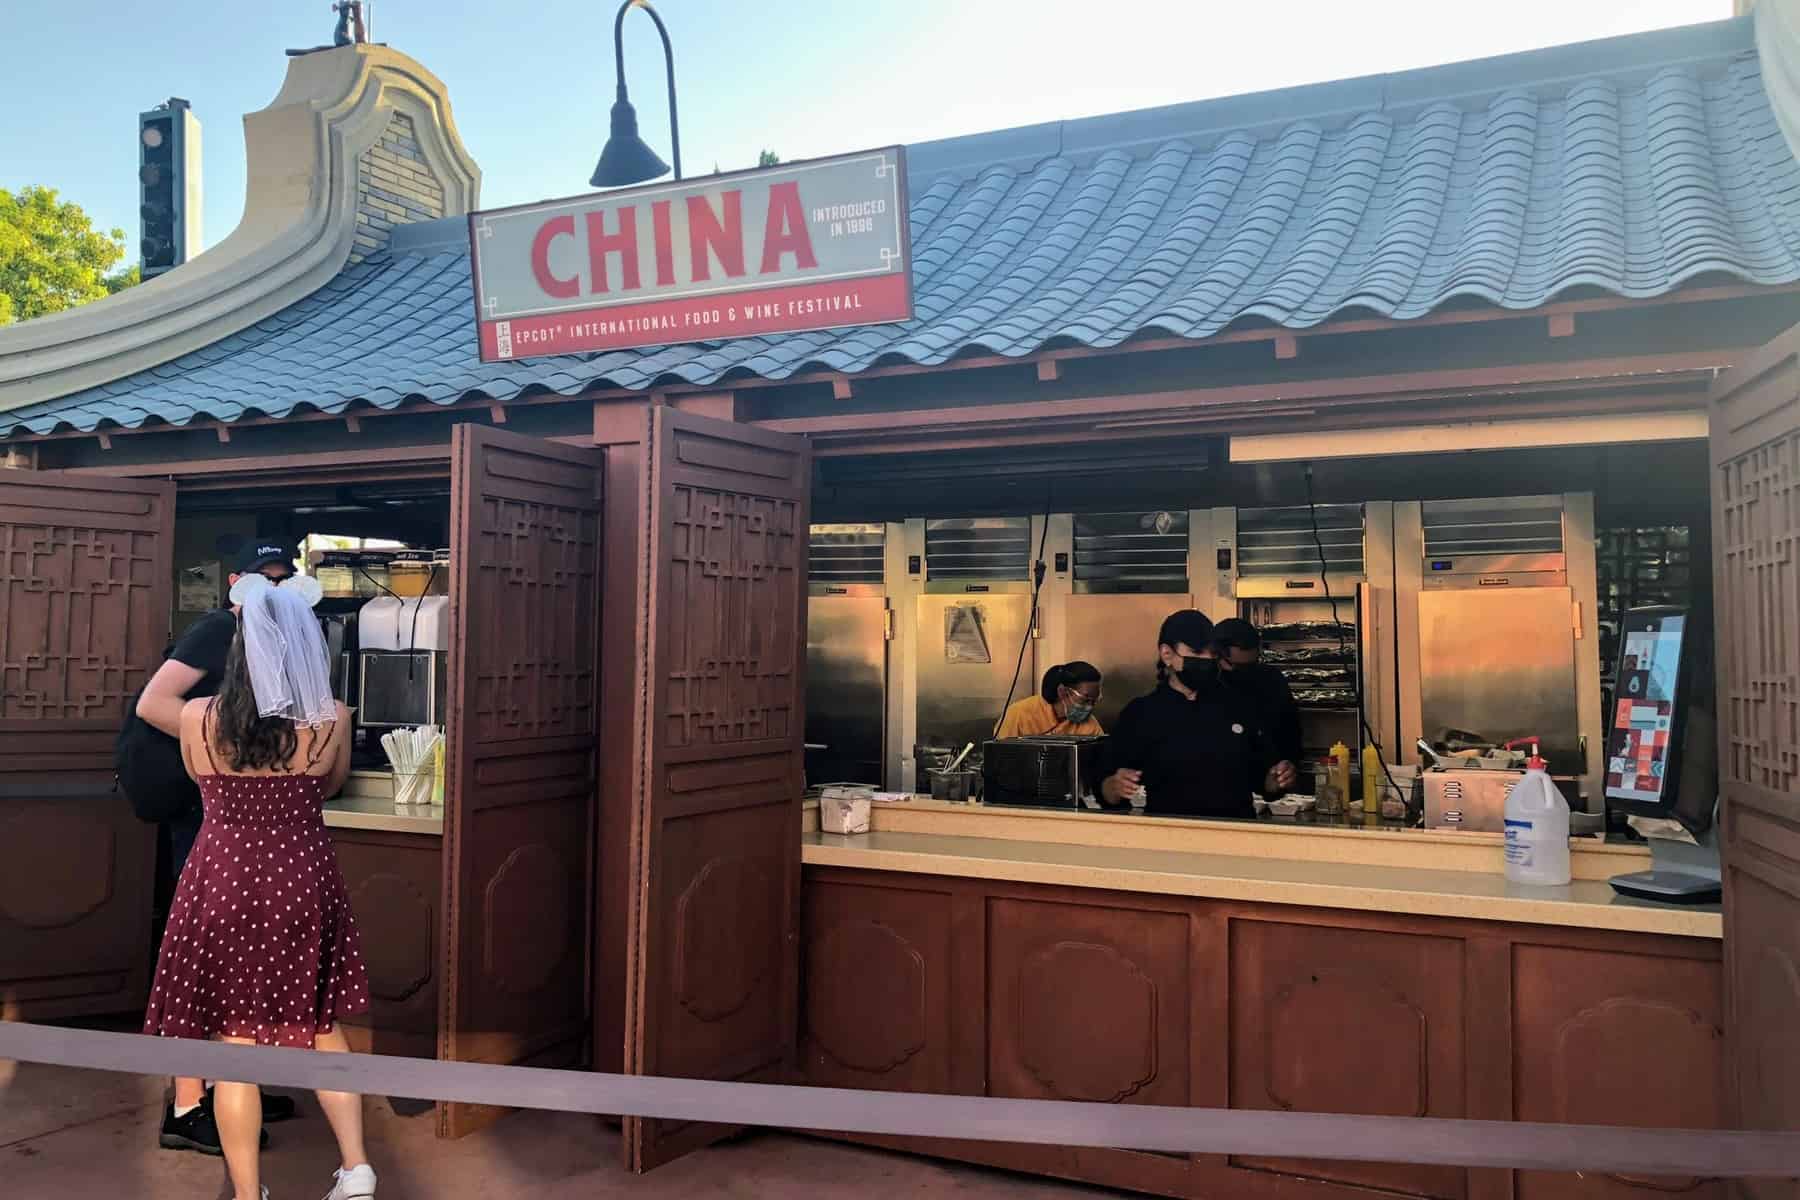 China Booth Menu & Review (2021 Epcot Food & Wine Festival)